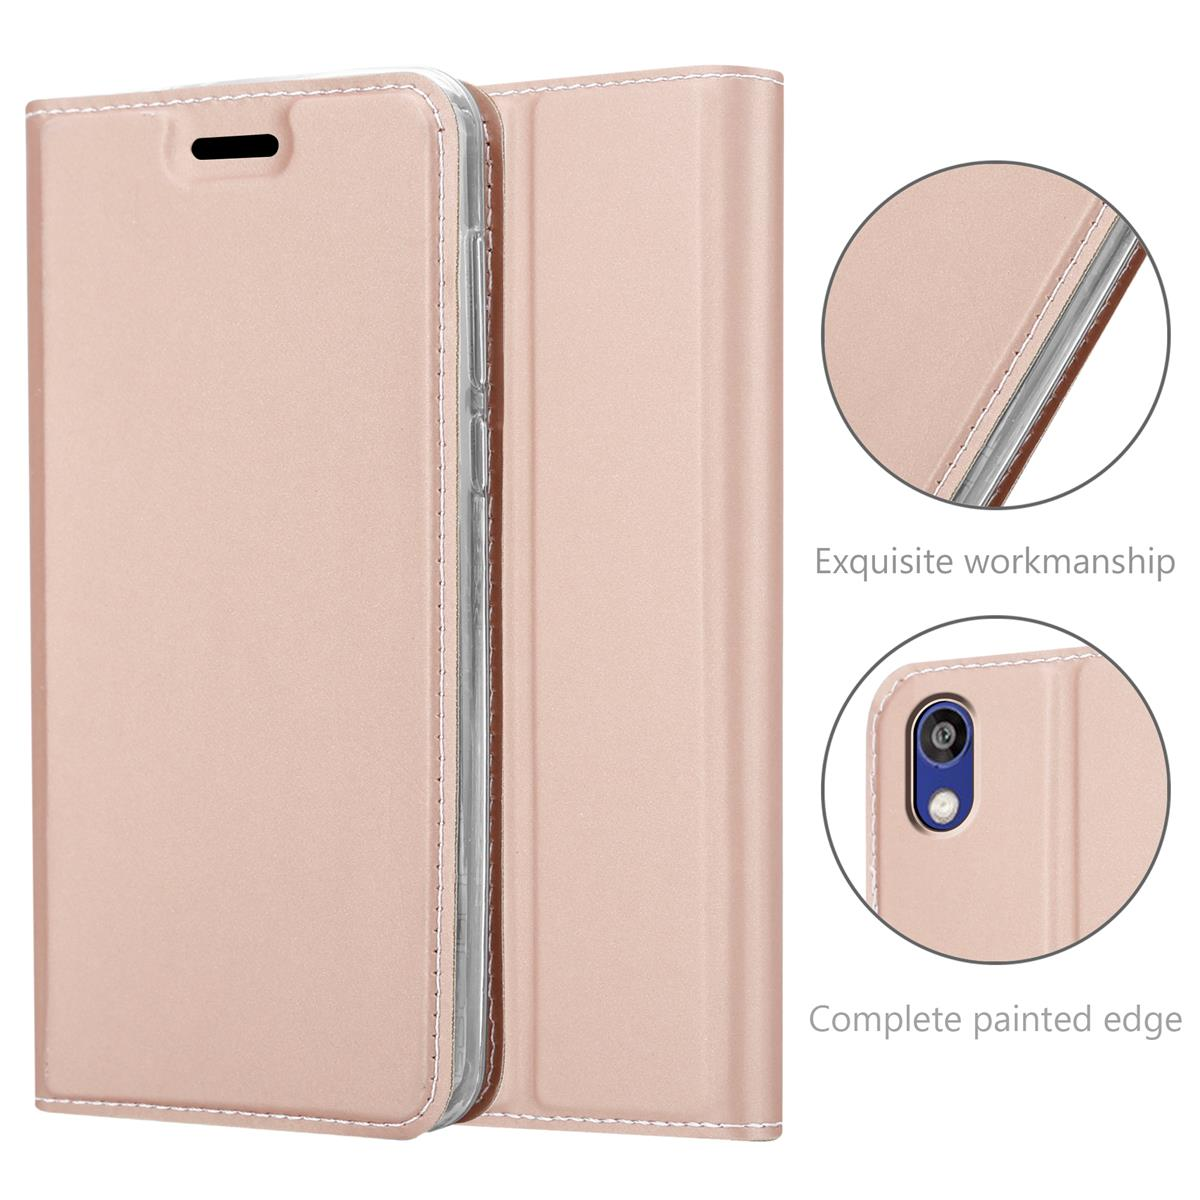 GOLD ROSÉ CADORABO Enjoy Book Play Handyhülle 2019 Honor Y5 / 8S, / Huawei, Classy Bookcover, CLASSY 8 Style,